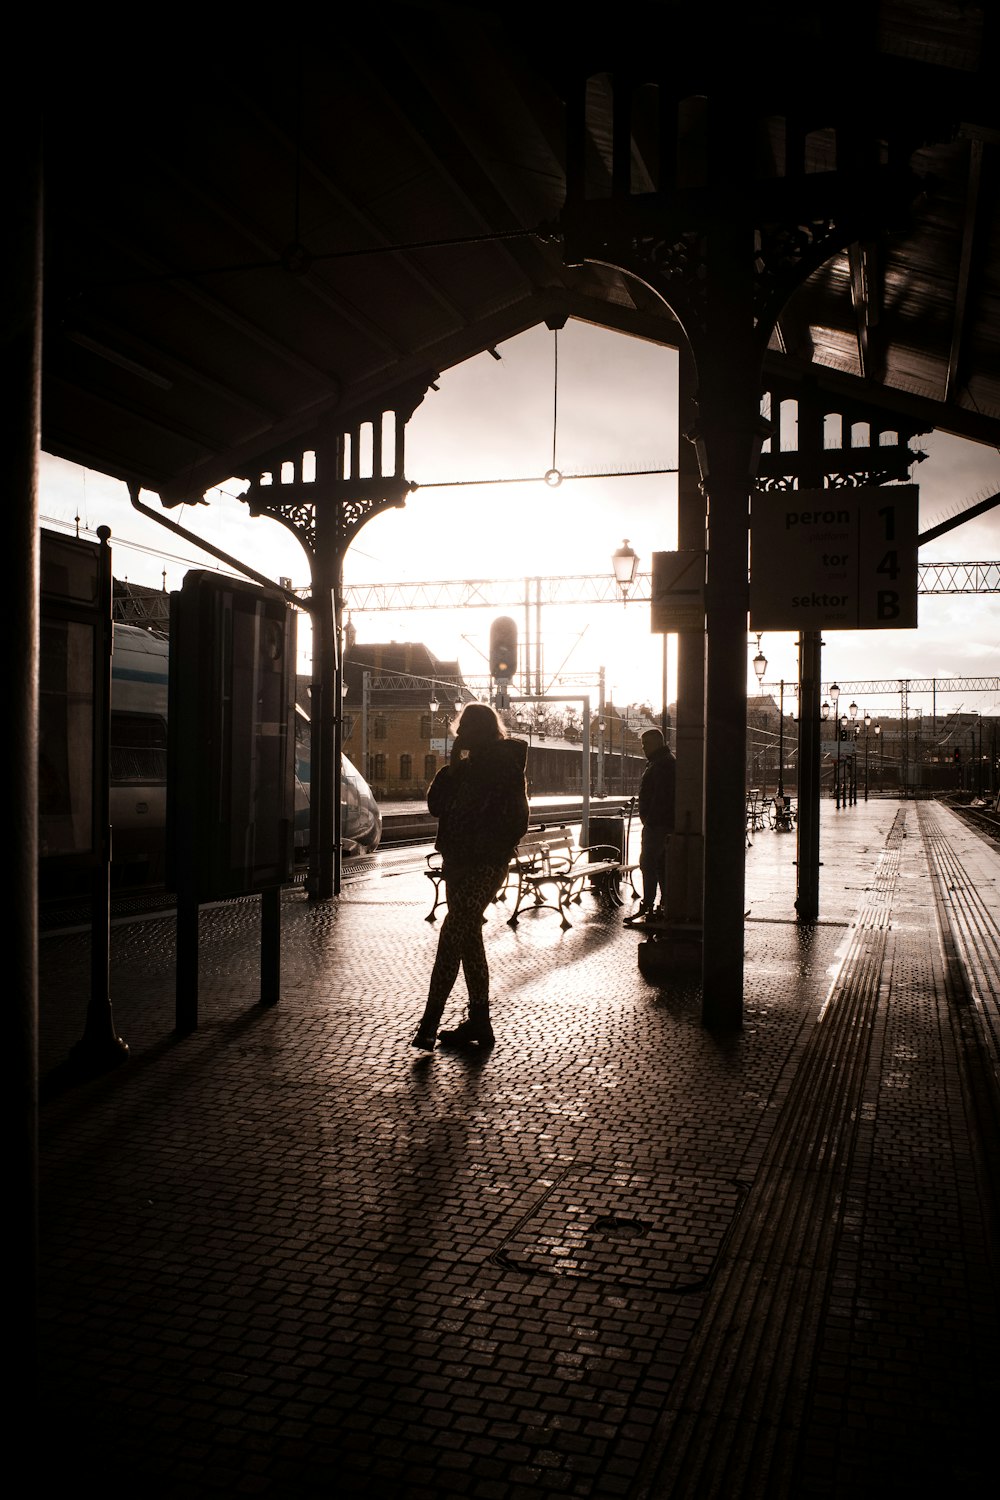 a person with a backpack walking on a train platform